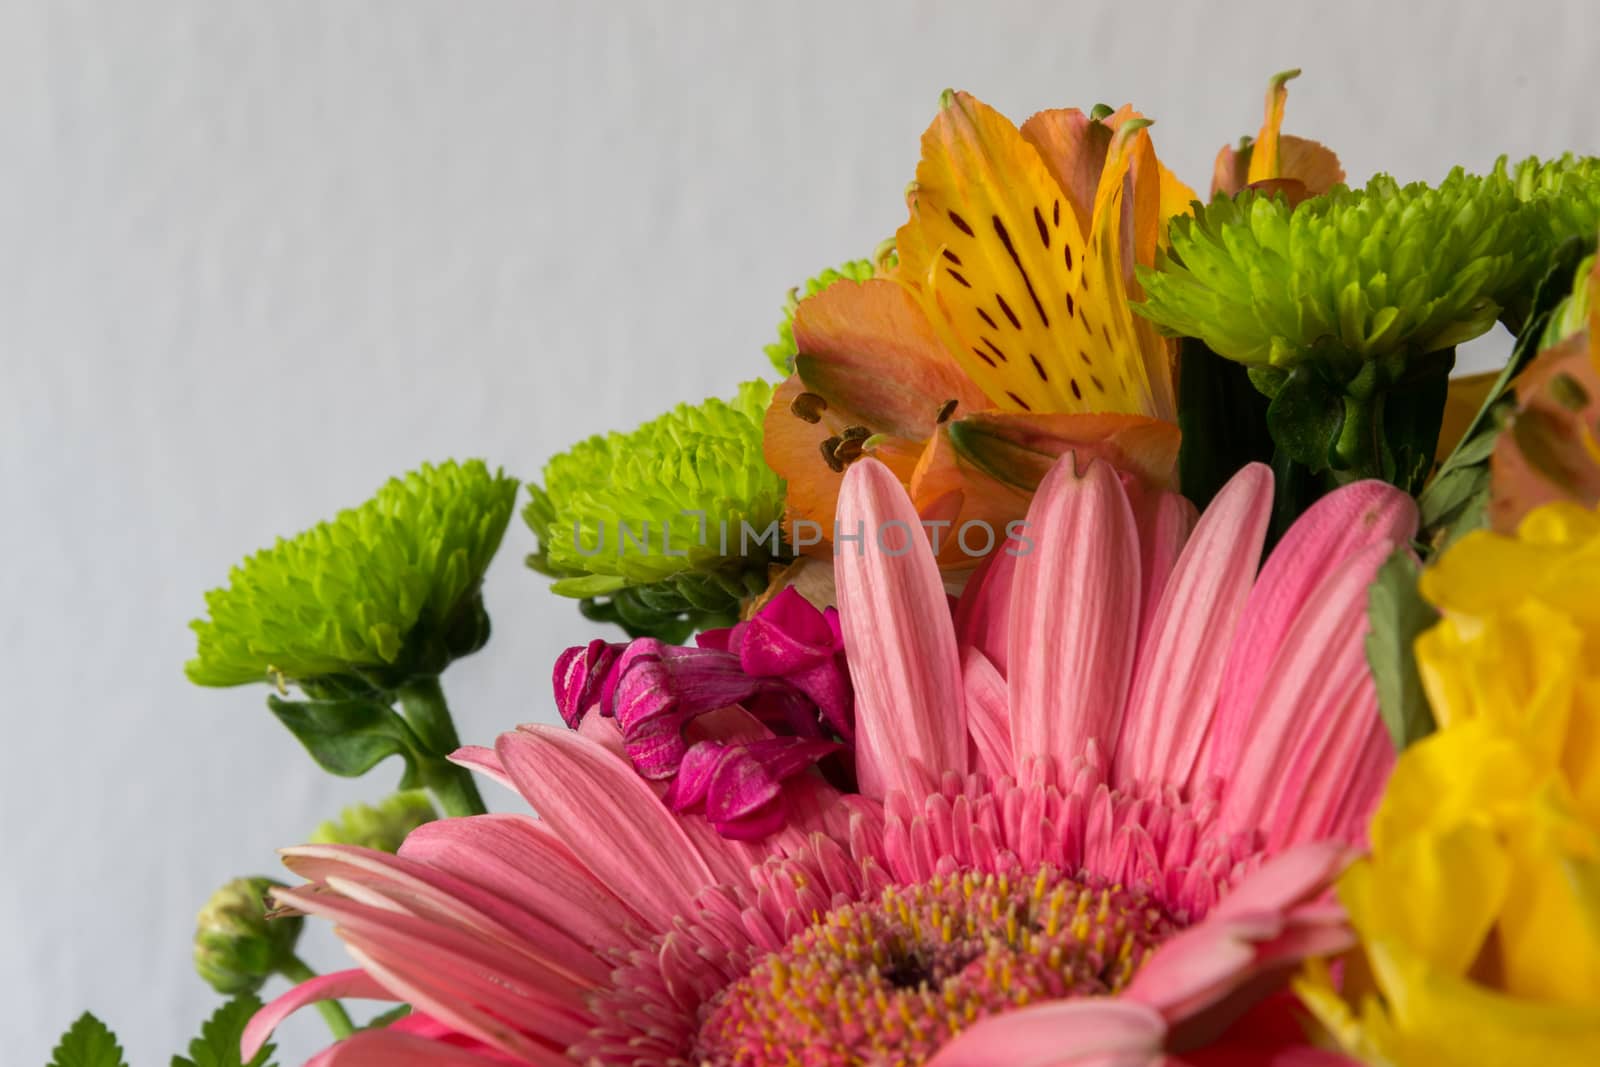 Bouquet of various colorful flowers by enrico.lapponi